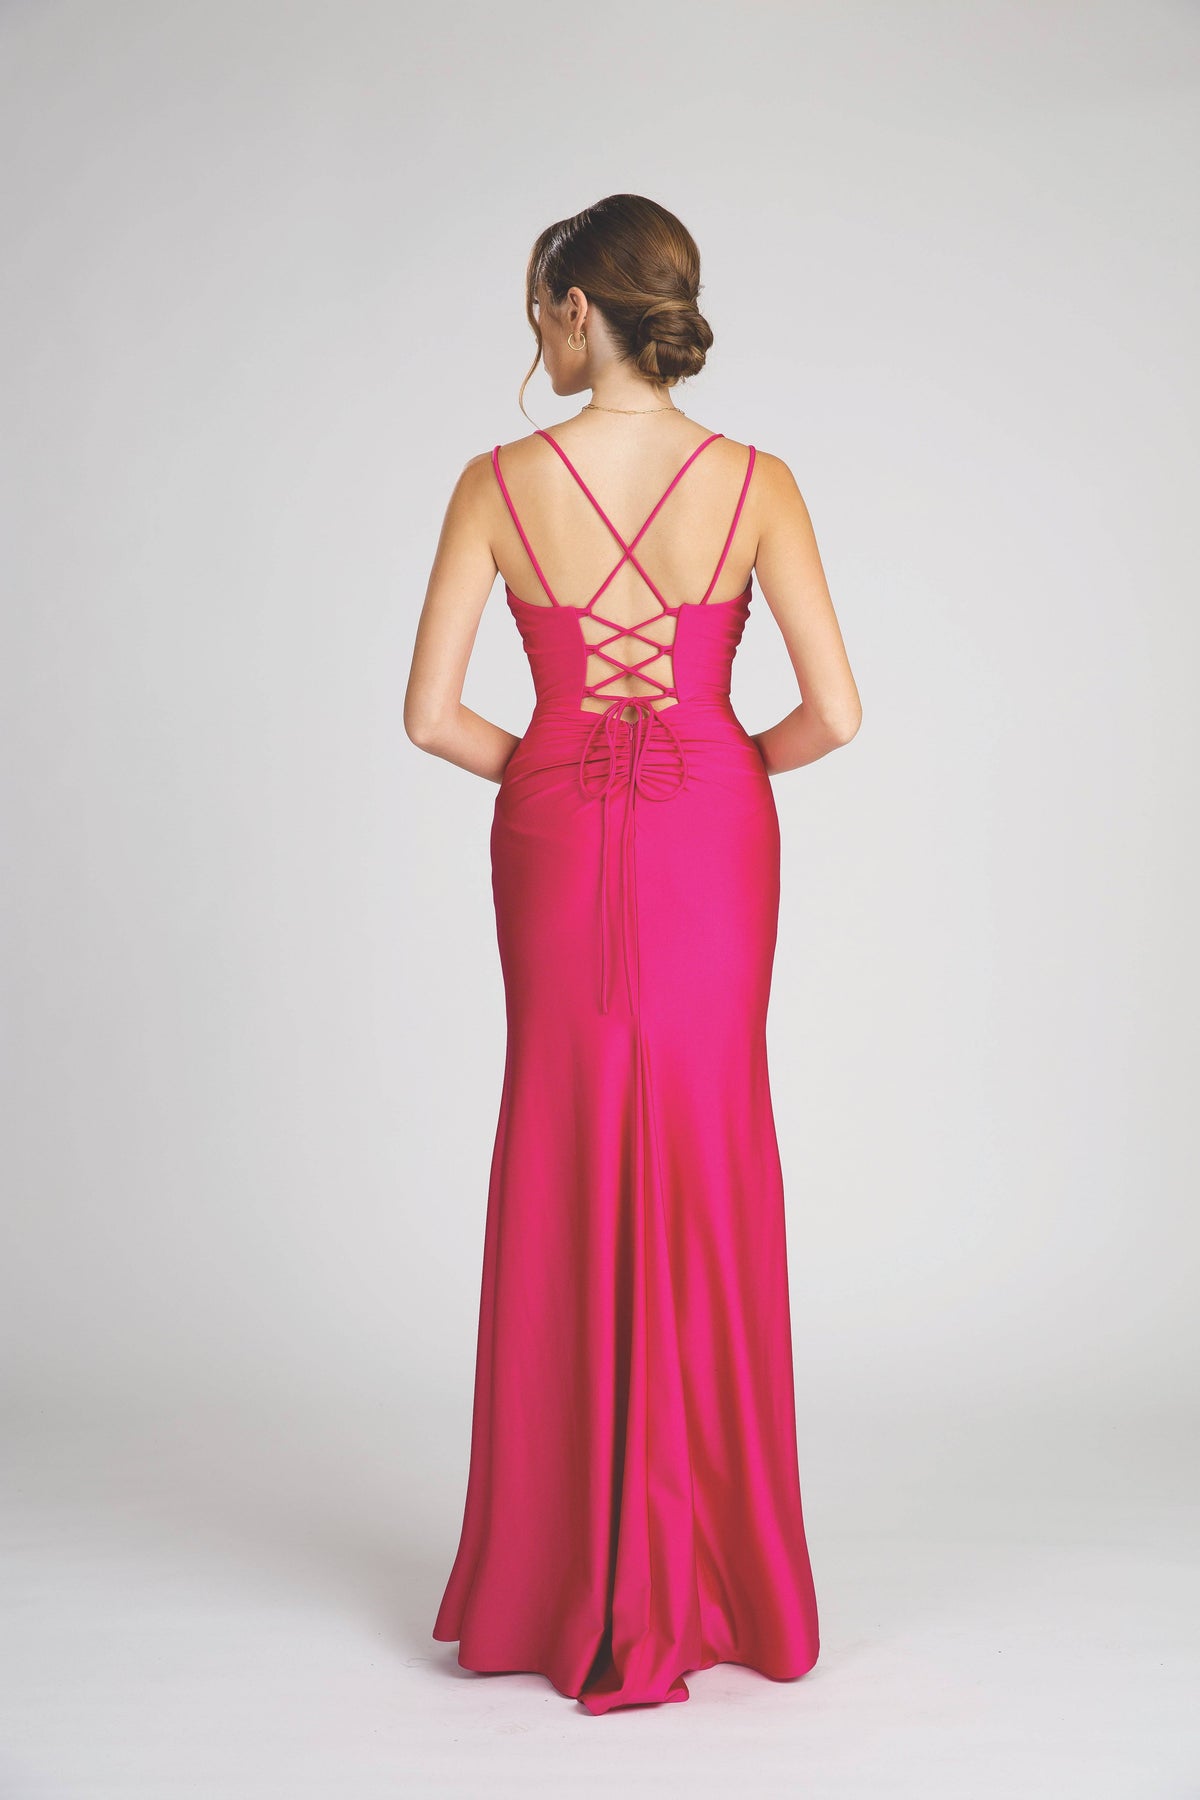 Fiesta 7238 High Slit Flowing Gown | 10 Colors - NORMA REED